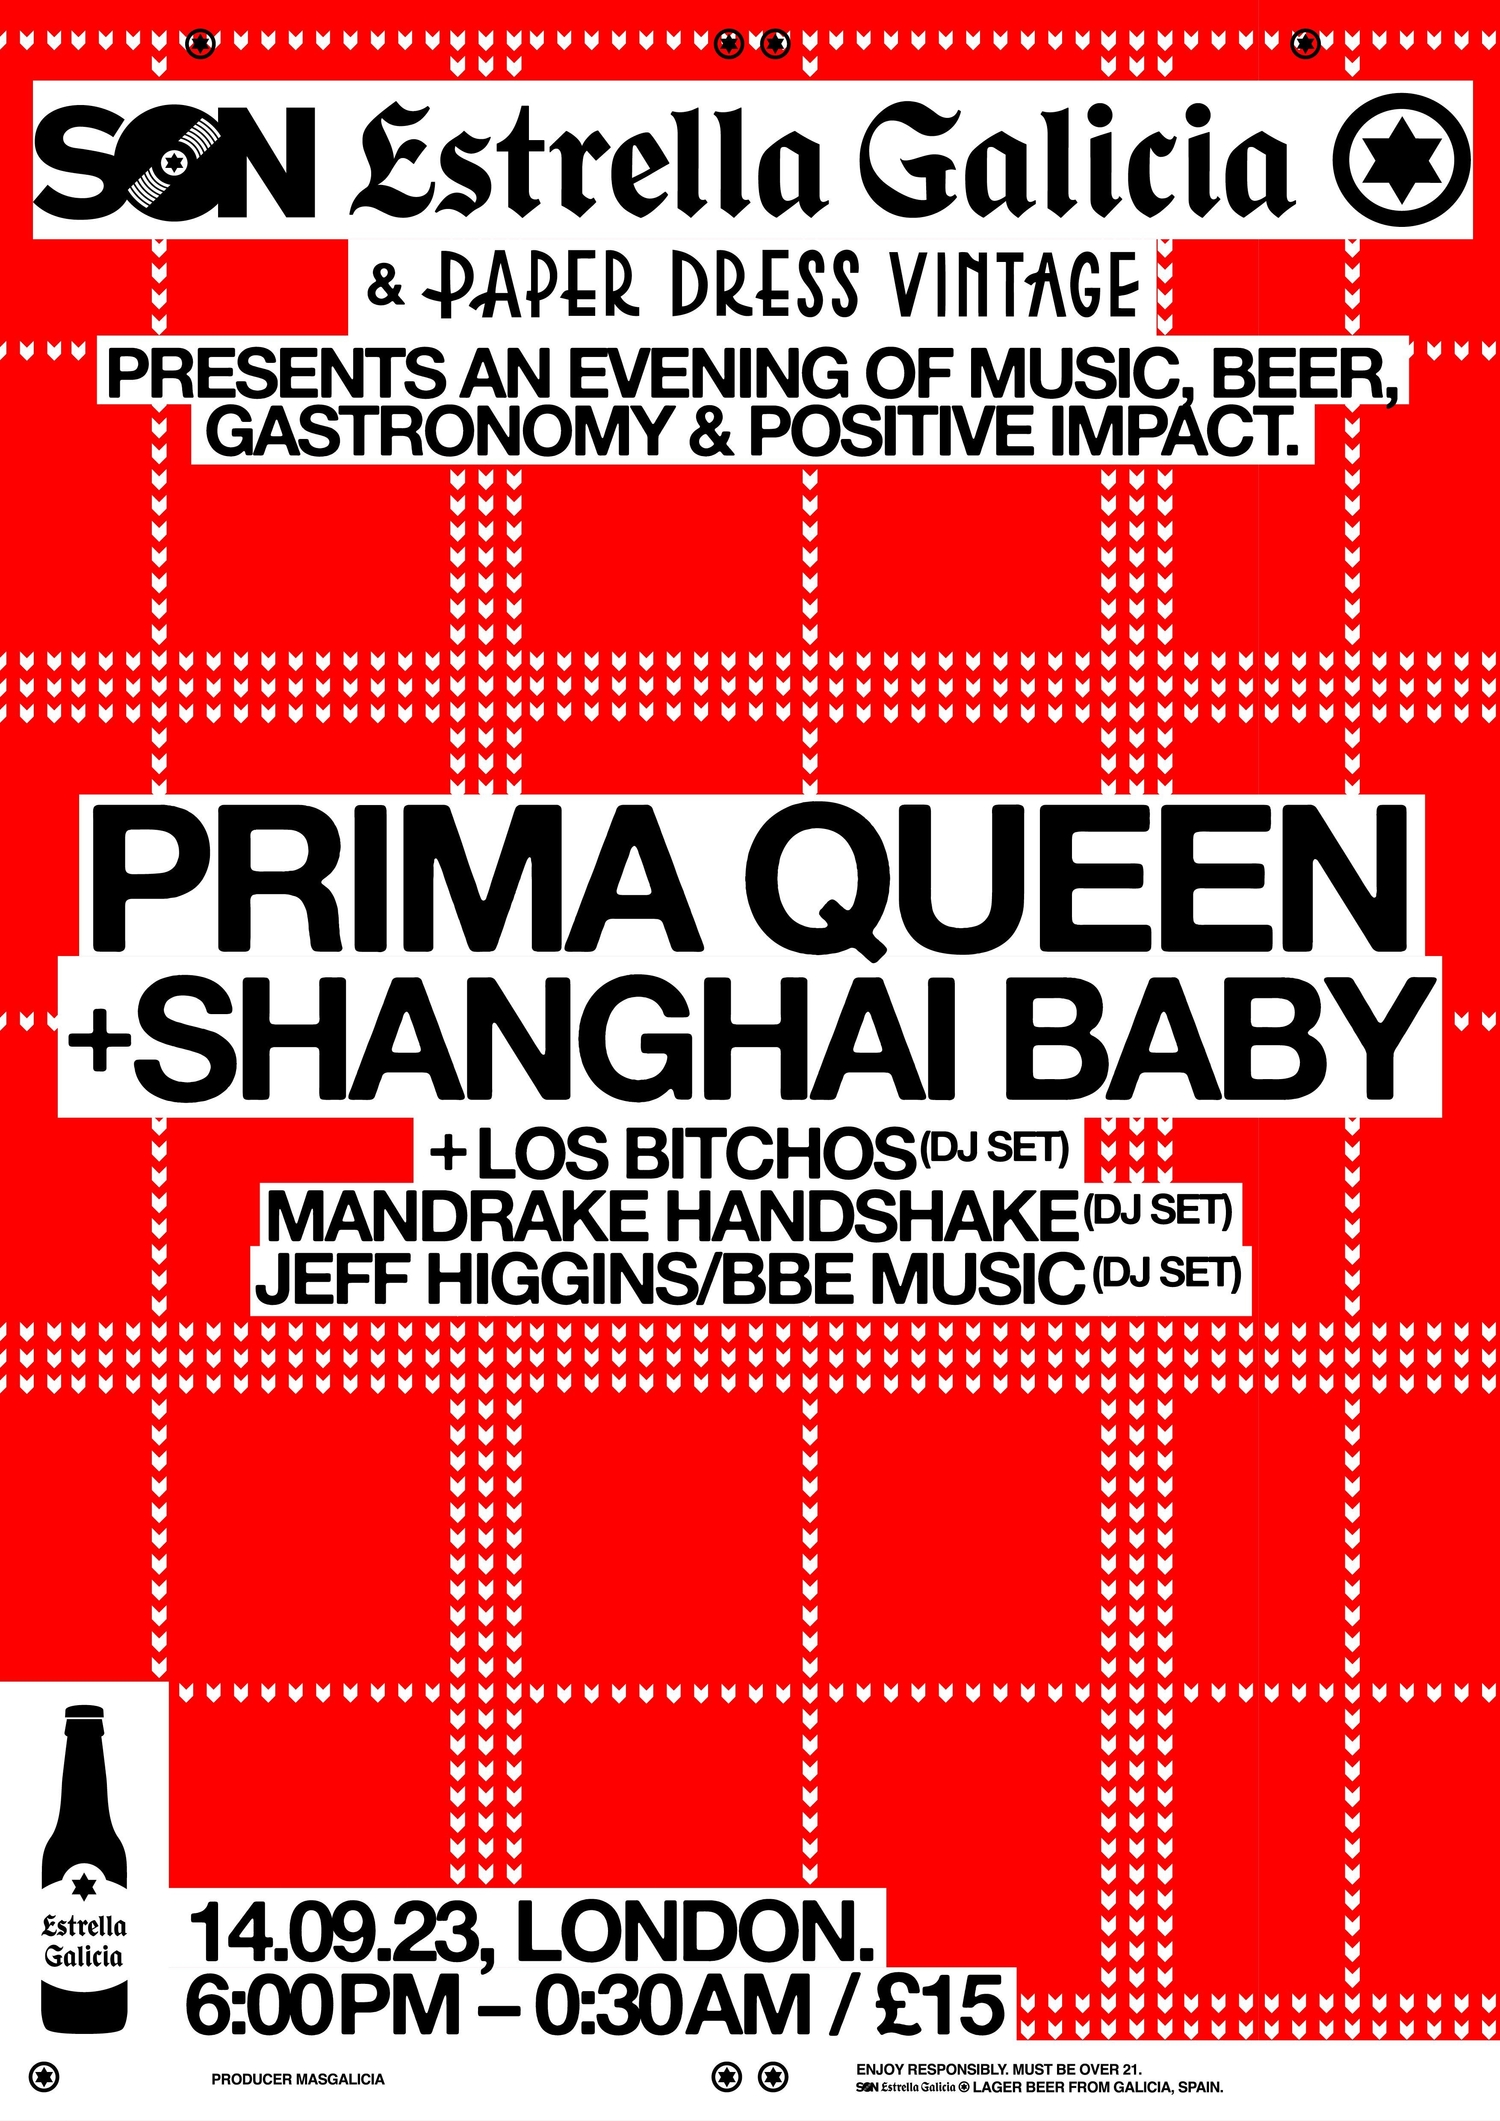 SON Estrella Galicia and Paper Dress Vintage announce next show with Prima Queen and Shanghai Baby